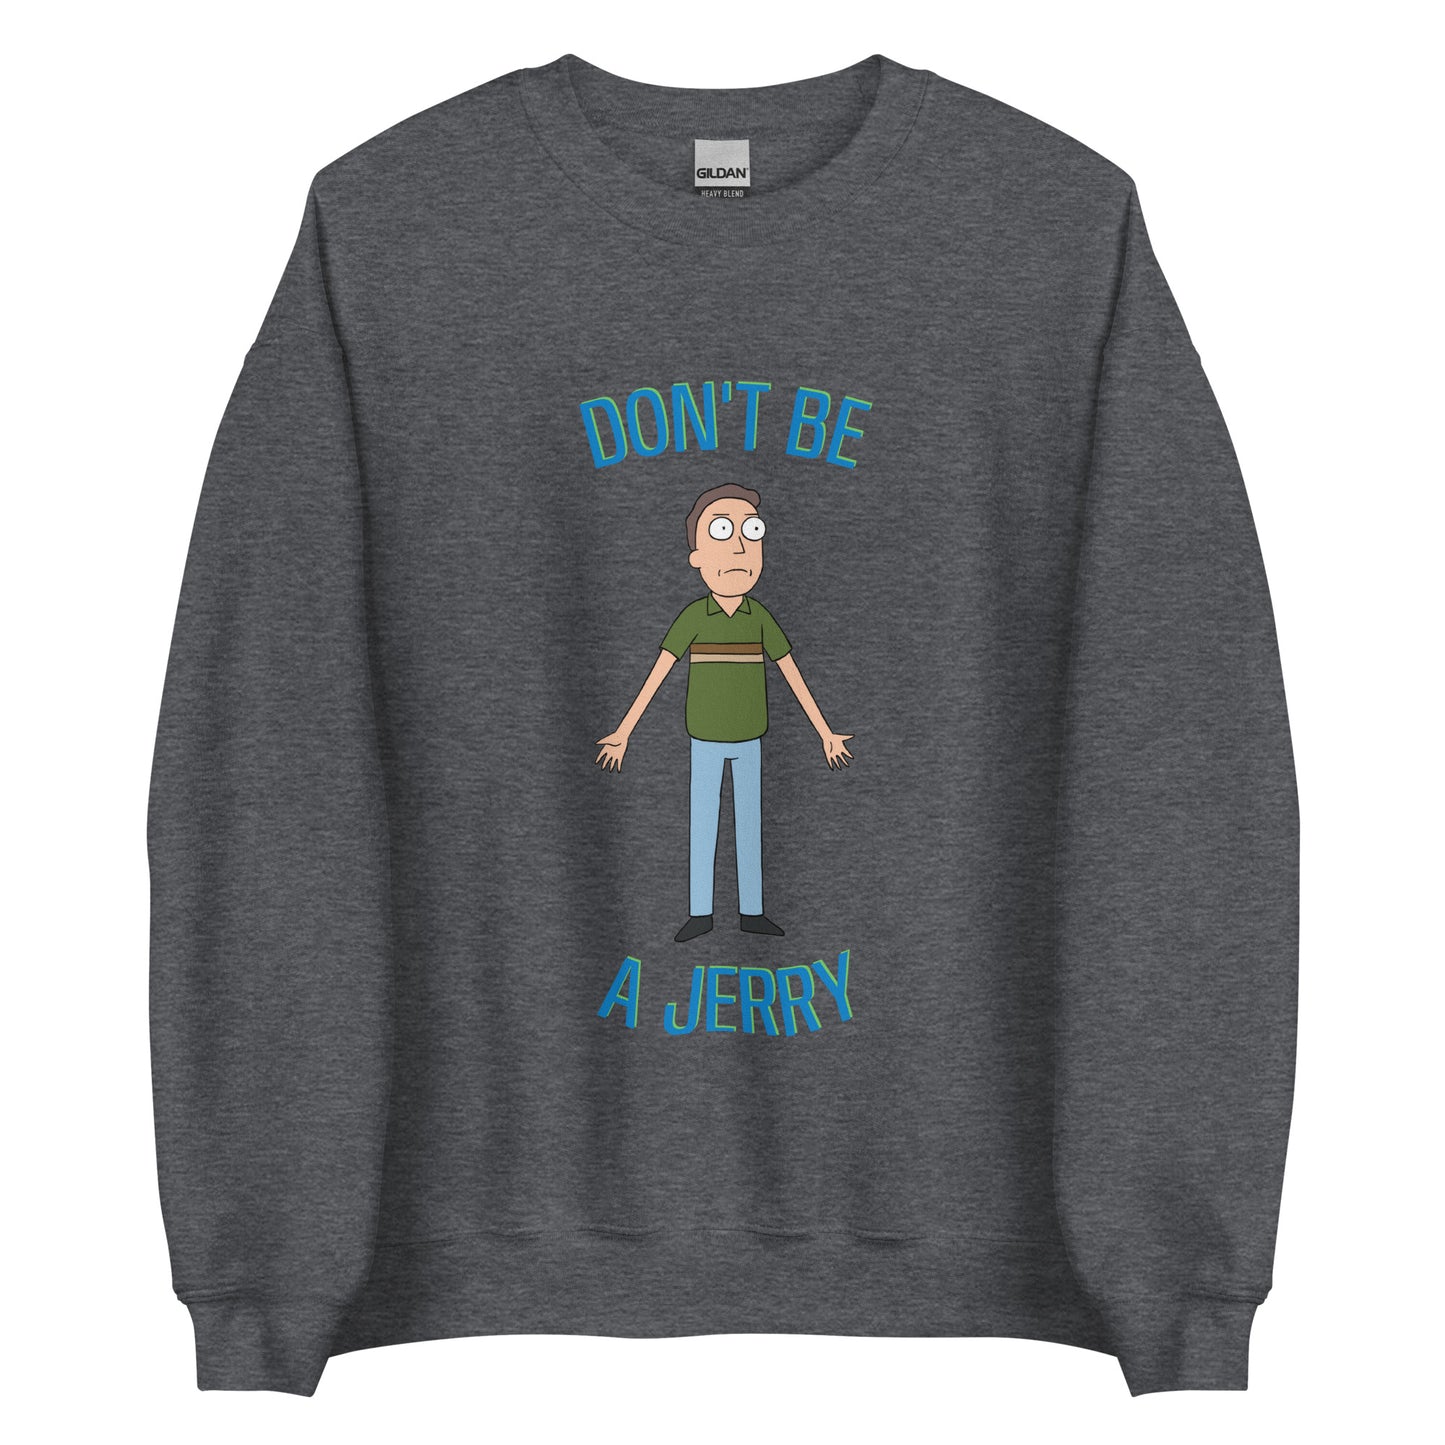 Sweatshirt Don't Be a Jerry